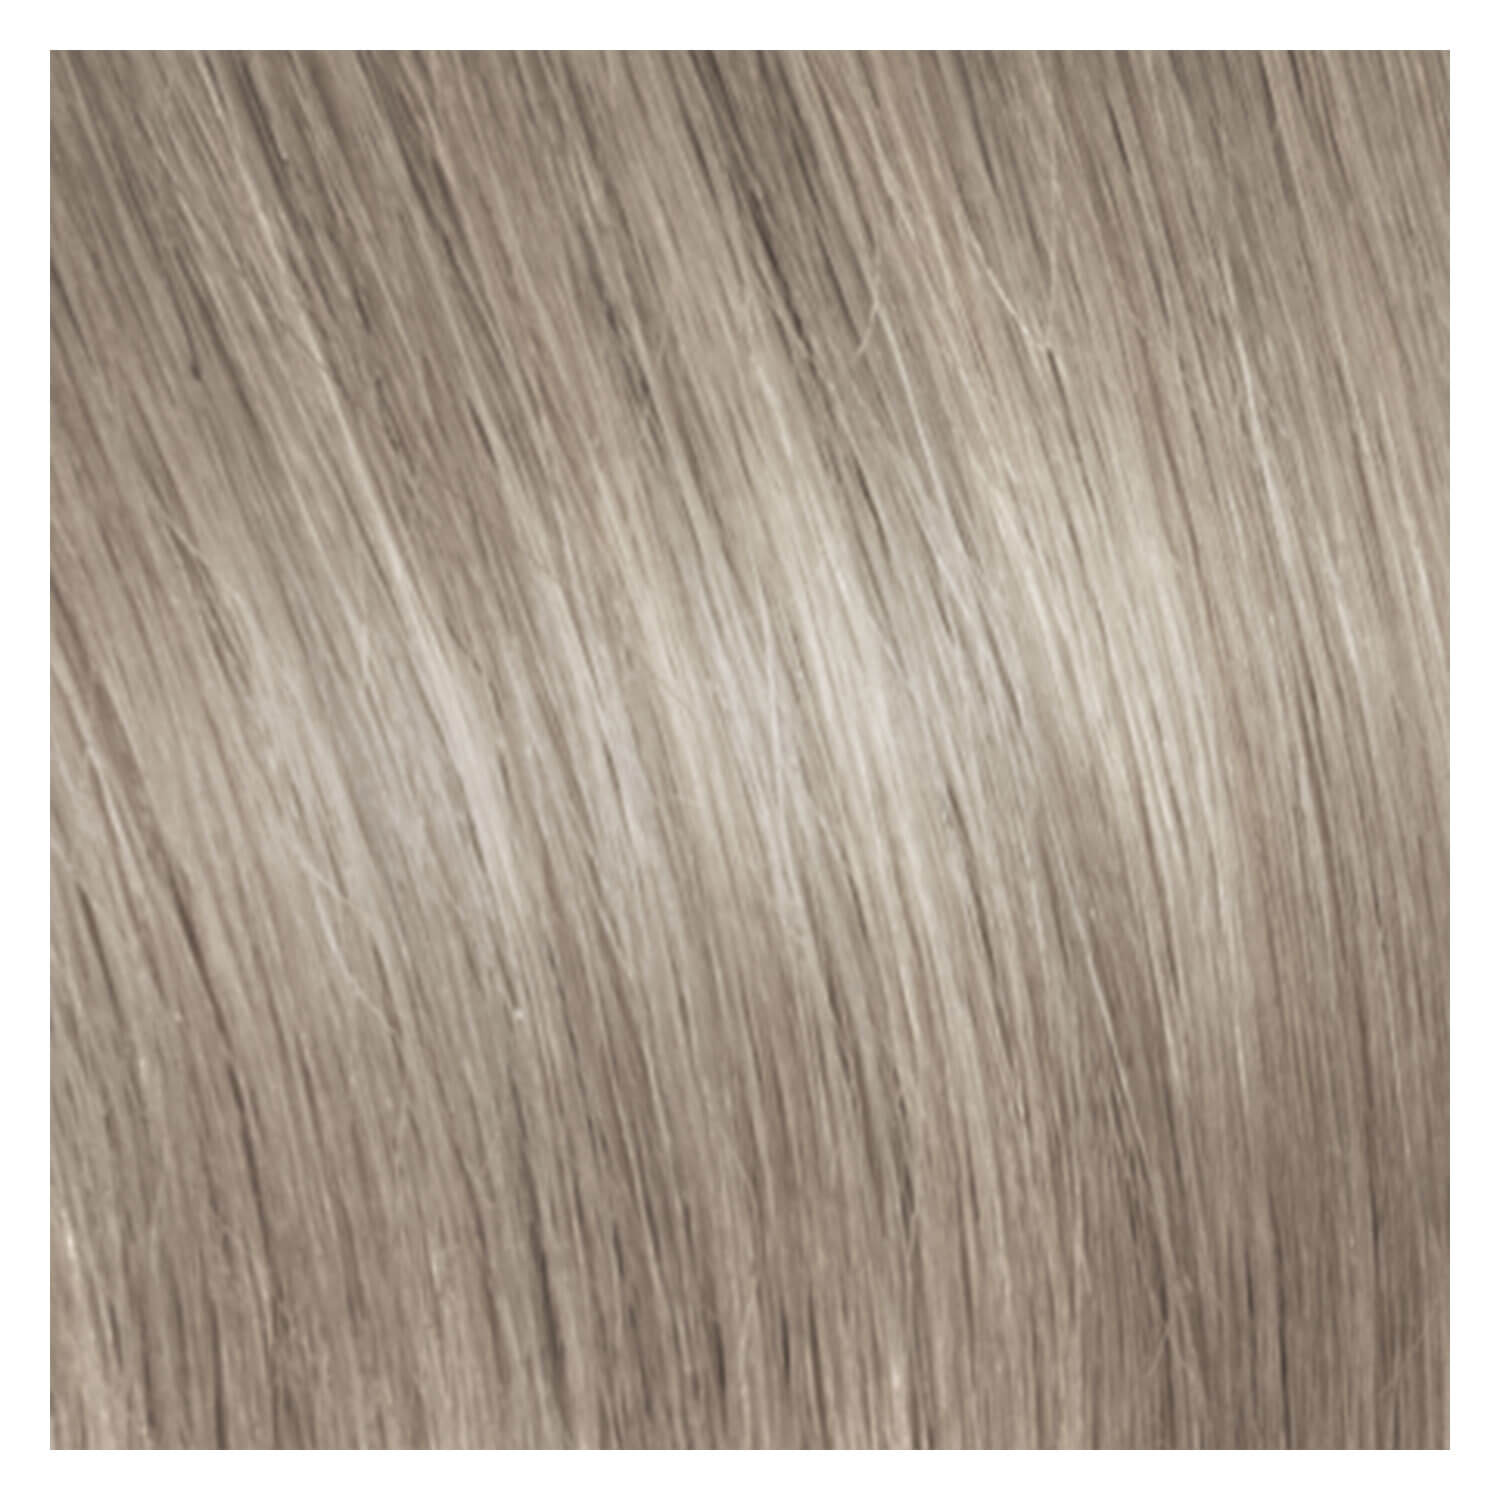 SHE Extensions SHE Tape In-System Hair Extensions Straight - 60 Platinum  Light Silver 55/60cm 